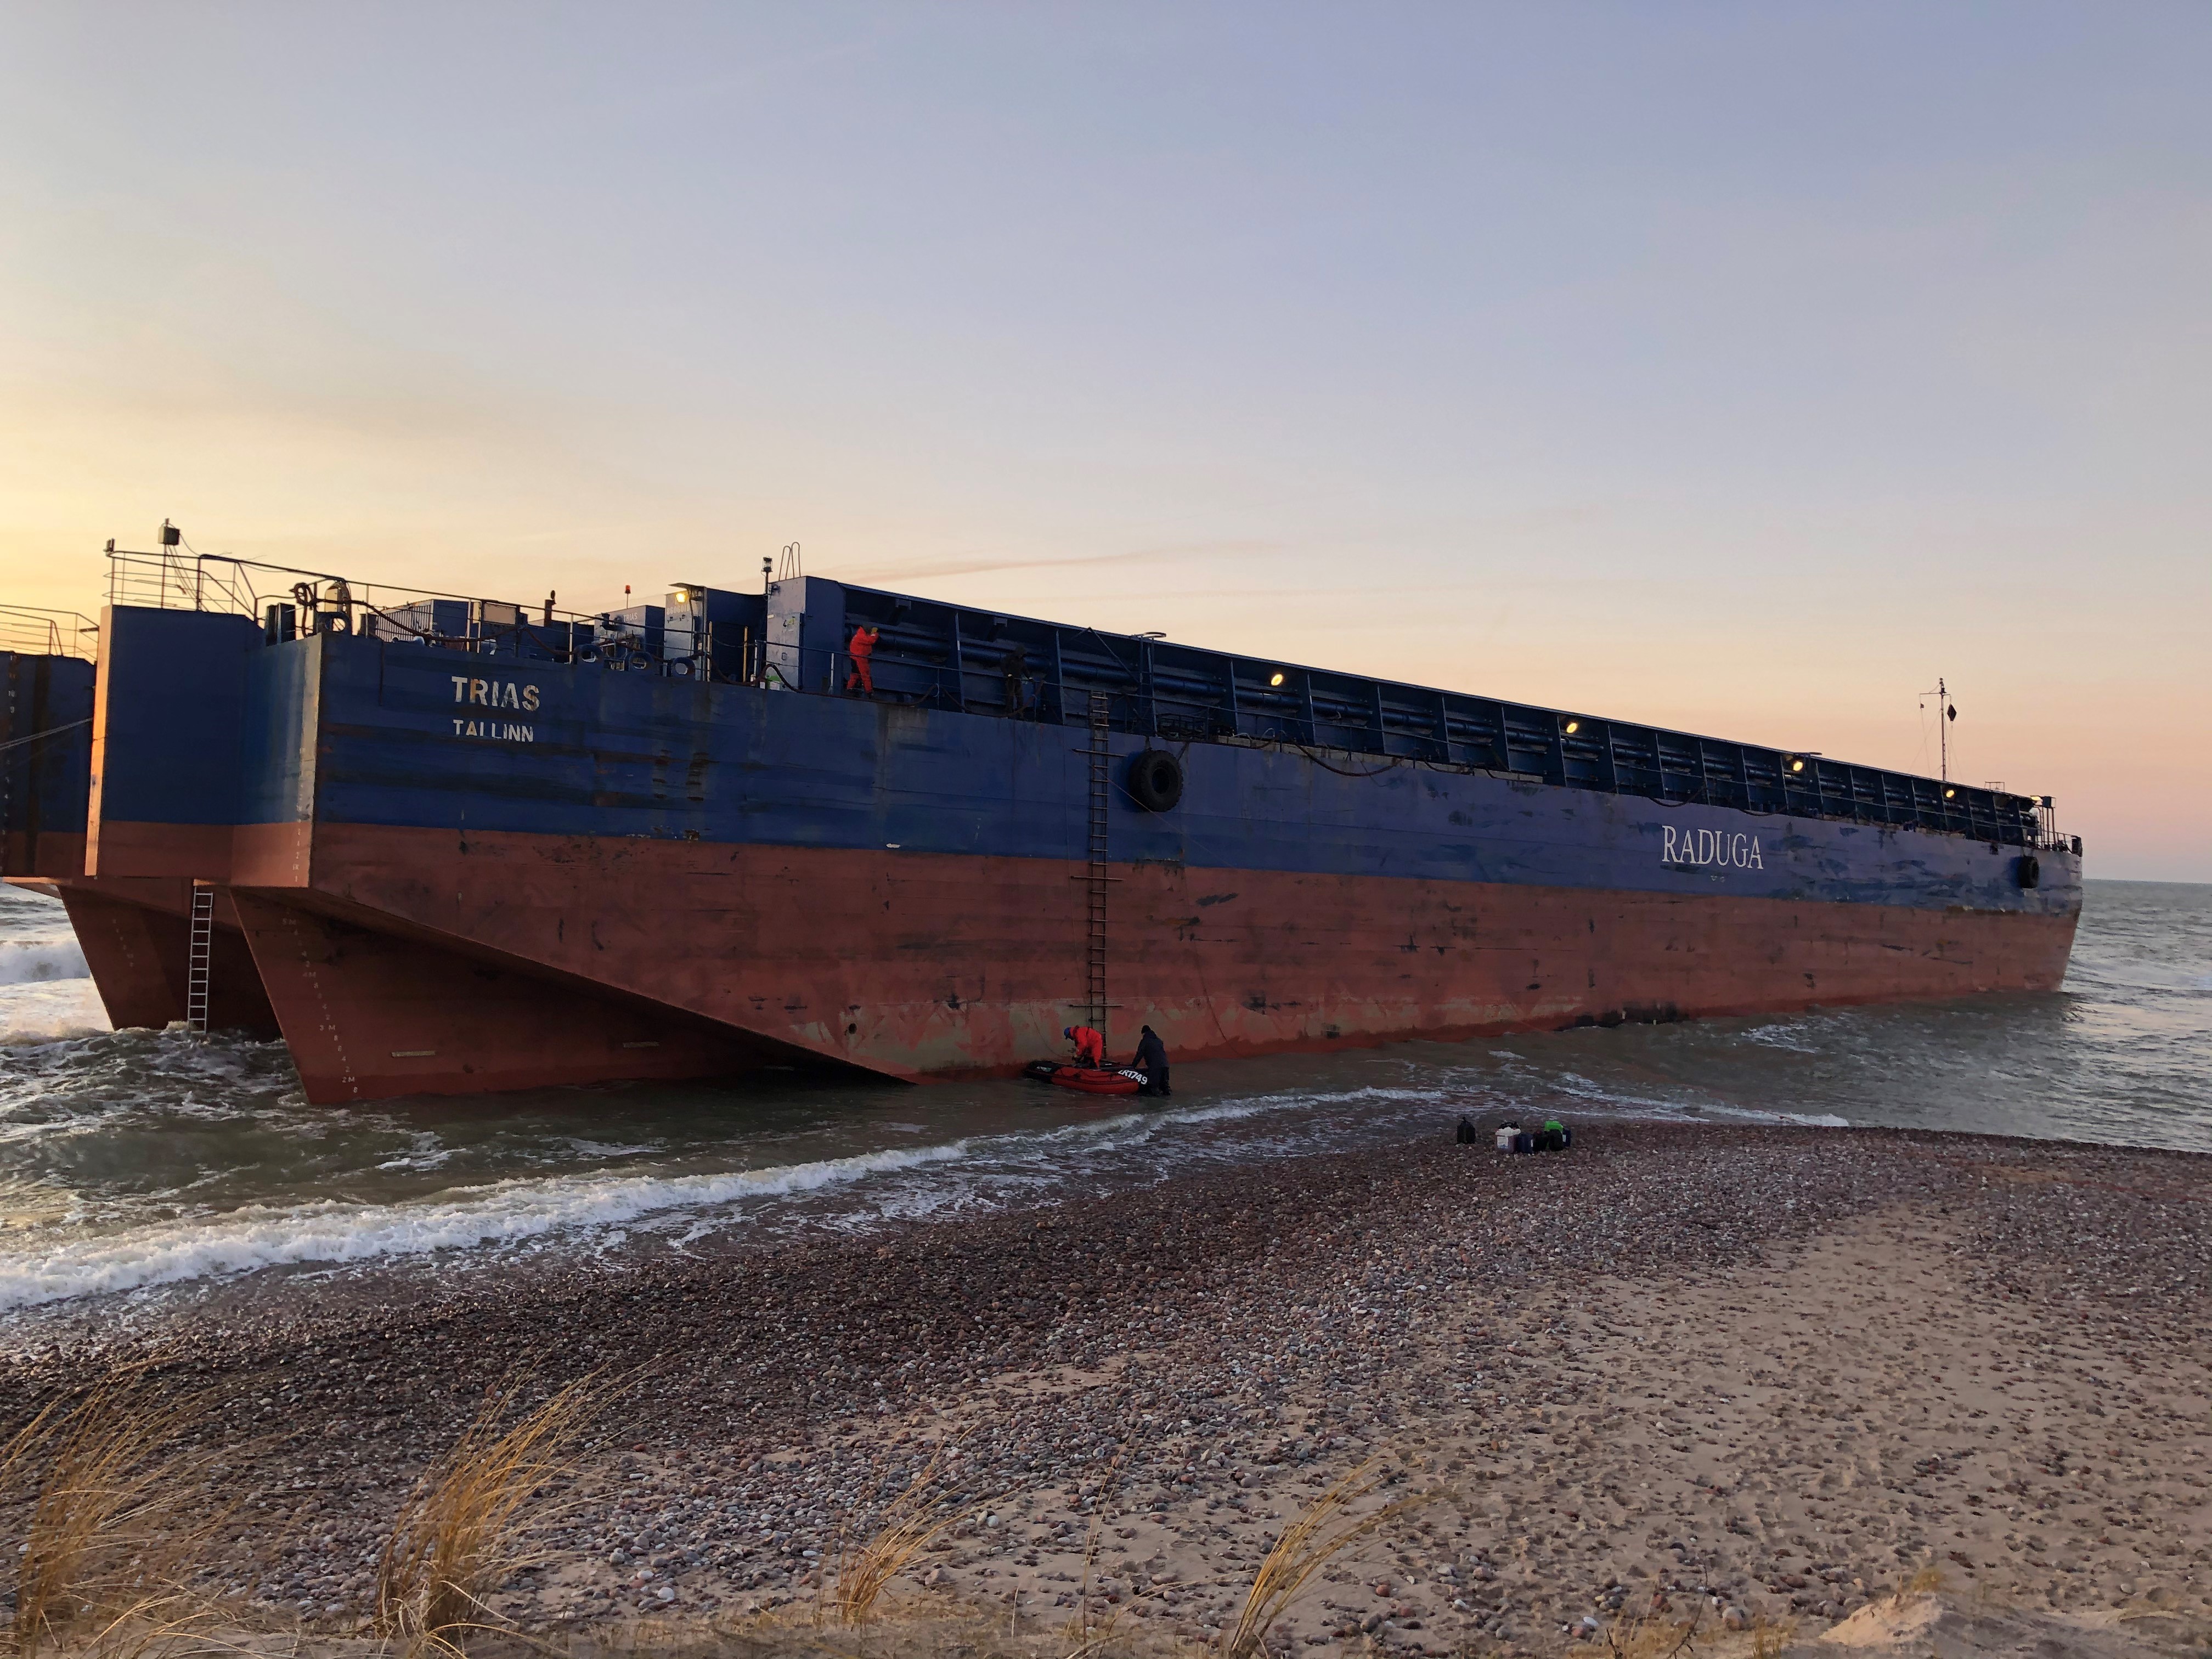 Salvage operation to refloat barge Trias succeeded